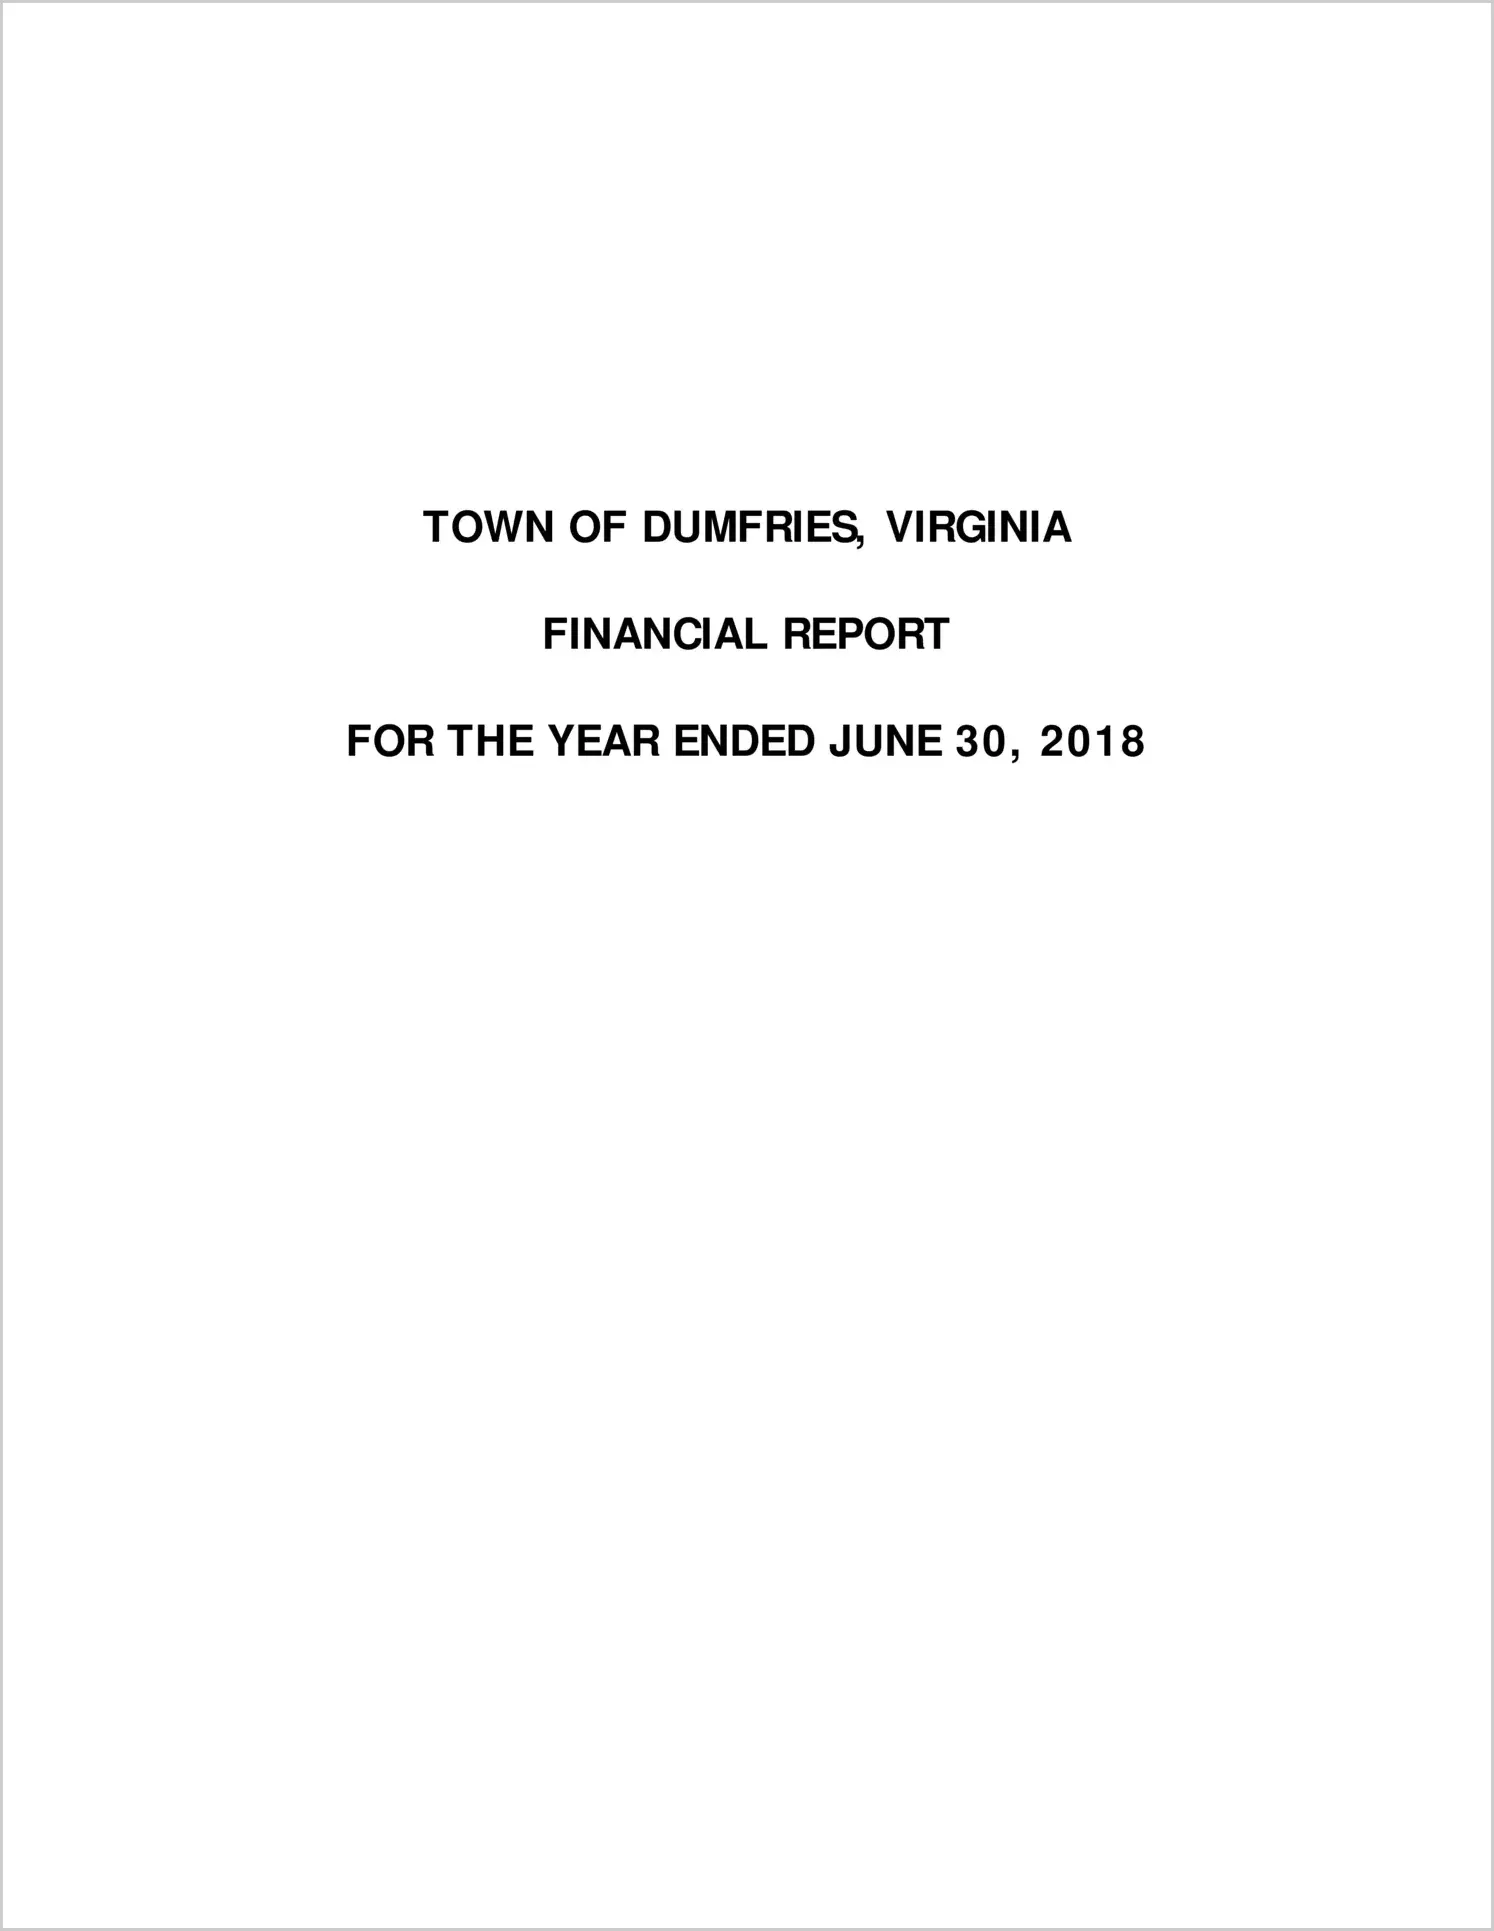 2018 Annual Financial Report for Town of Dumfries